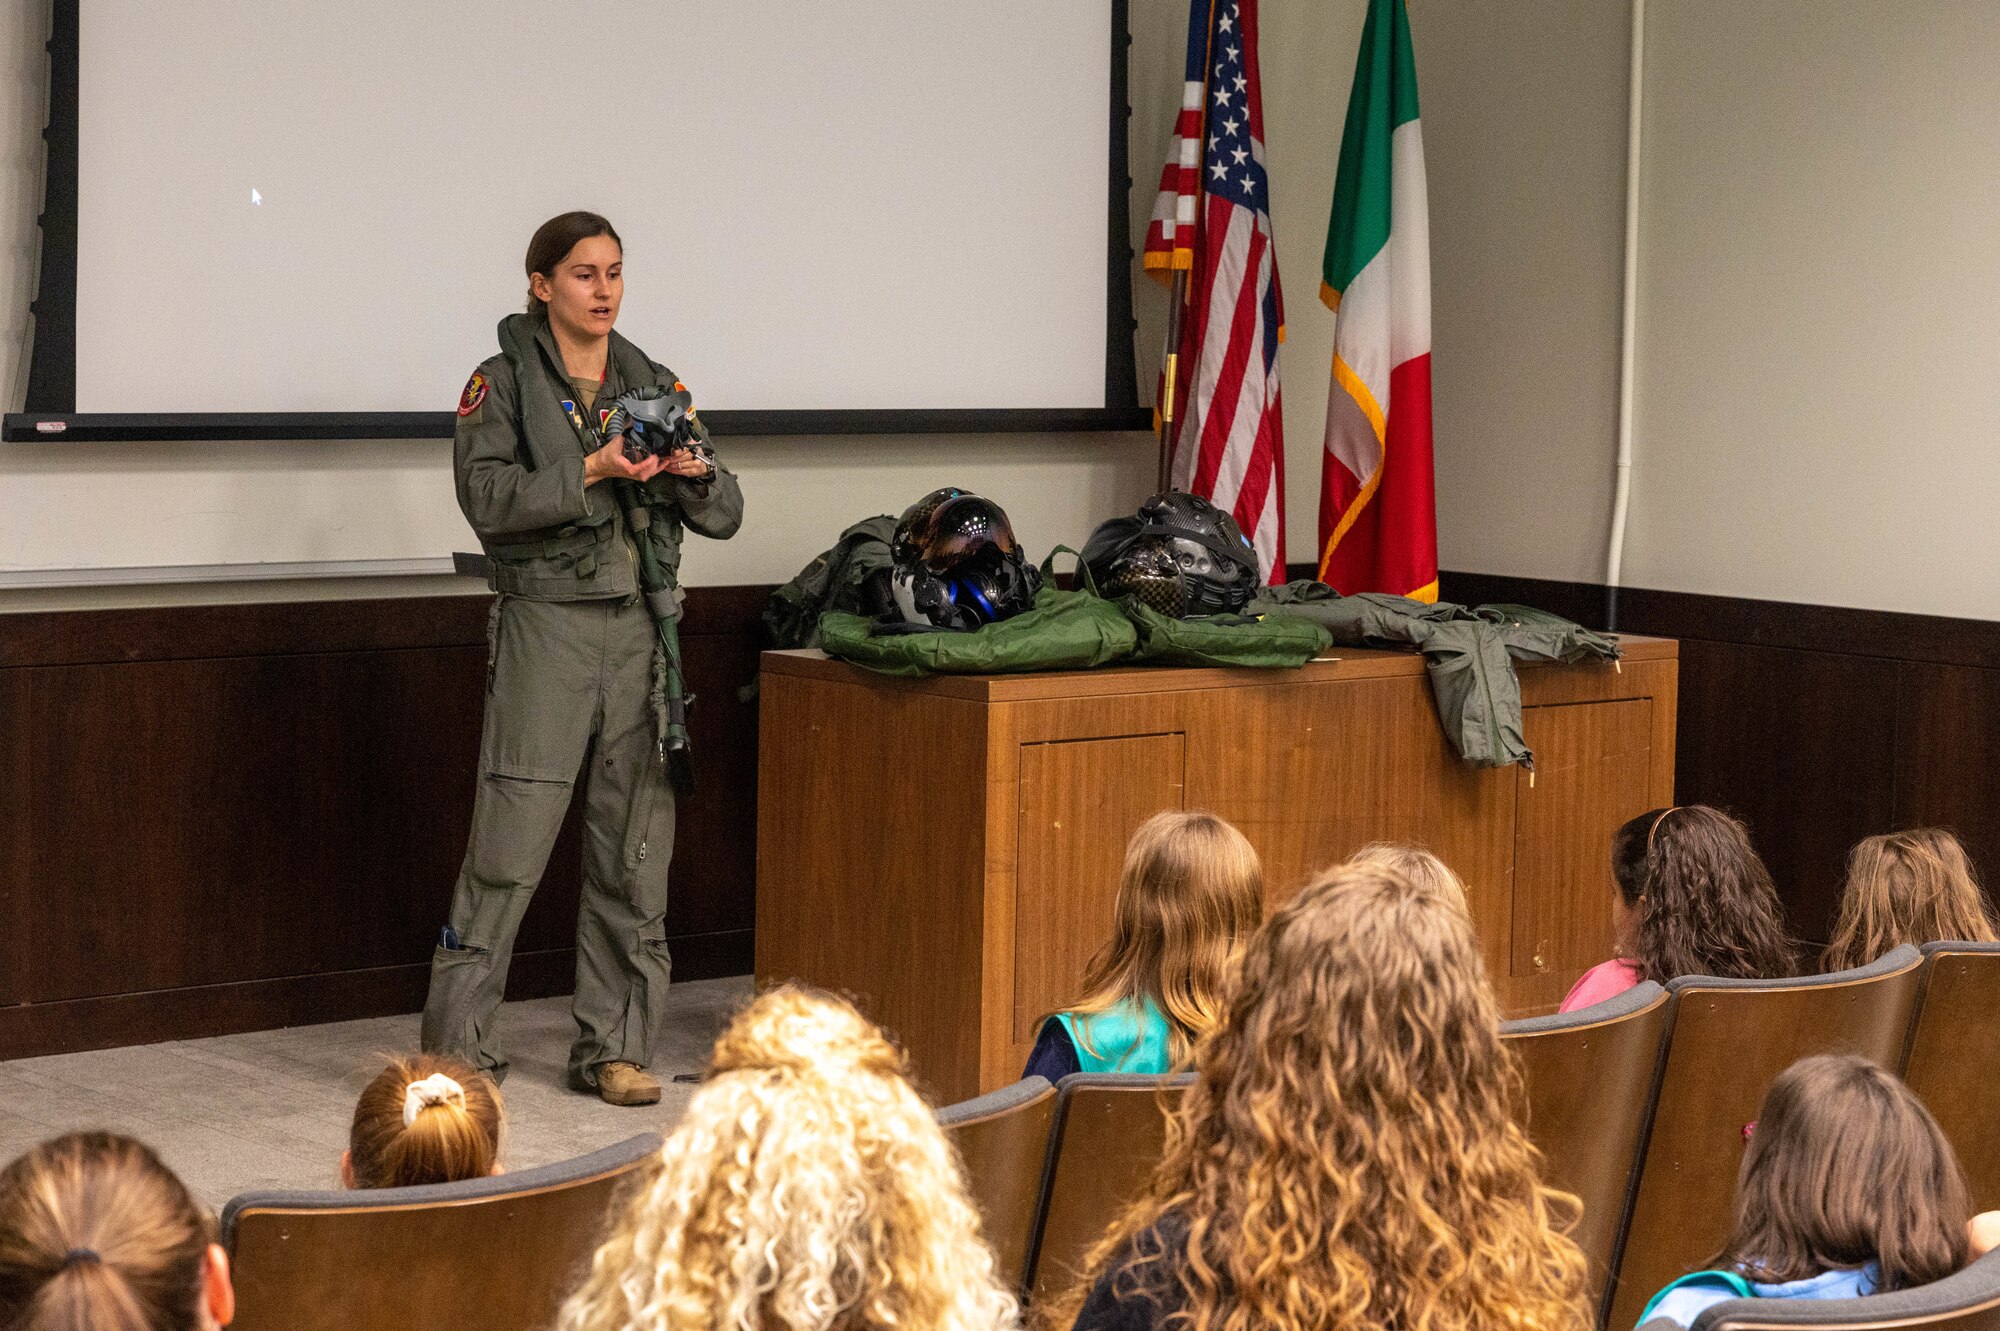 U.S. Air Force Capt. Melanie Kluesner, 62nd Fighter Squadron student pilot, shows various pieces of flight equipment to a local Girl Scouts troop Jan. 11, 2023, at Luke Air Force Base, Arizona.